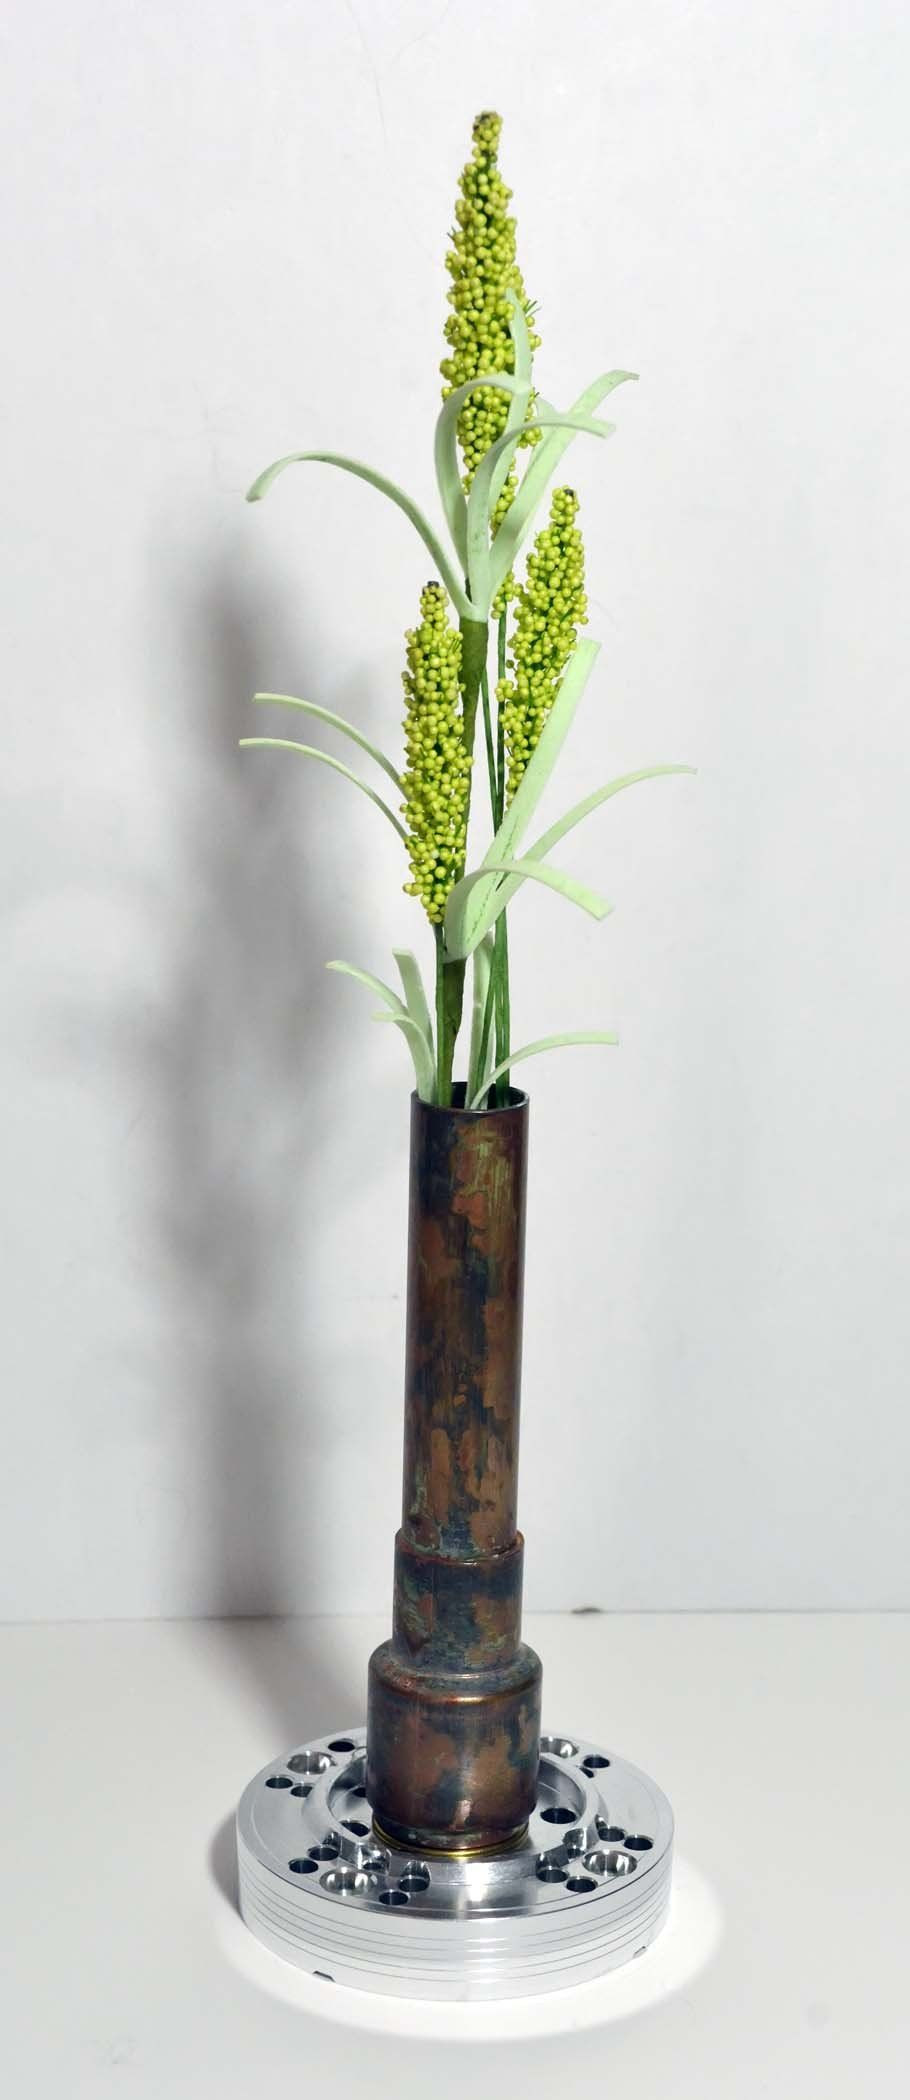 25 Elegant Vintage Style Vases 2024 free download vintage style vases of steampunk style decorative dried bud vase made from recycled inside steampunk style decorative dried bud vase made from recycled materials vintage chemistry lab bunsen